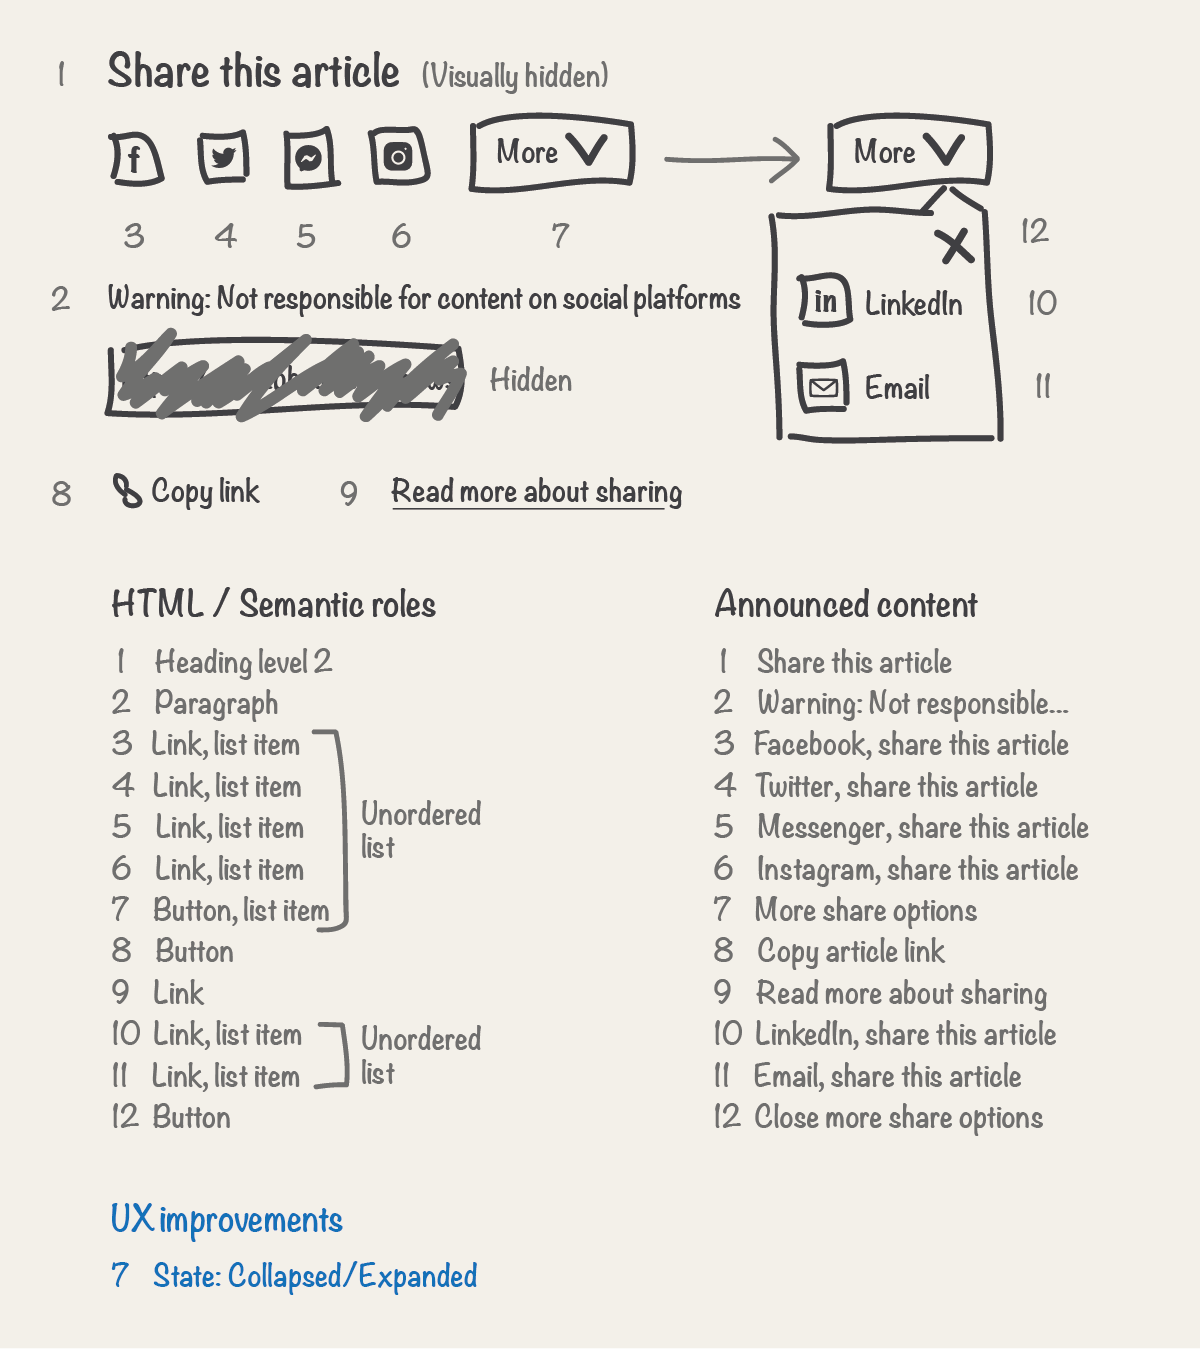 Step 7, sketch with list added documenting any UX improvements